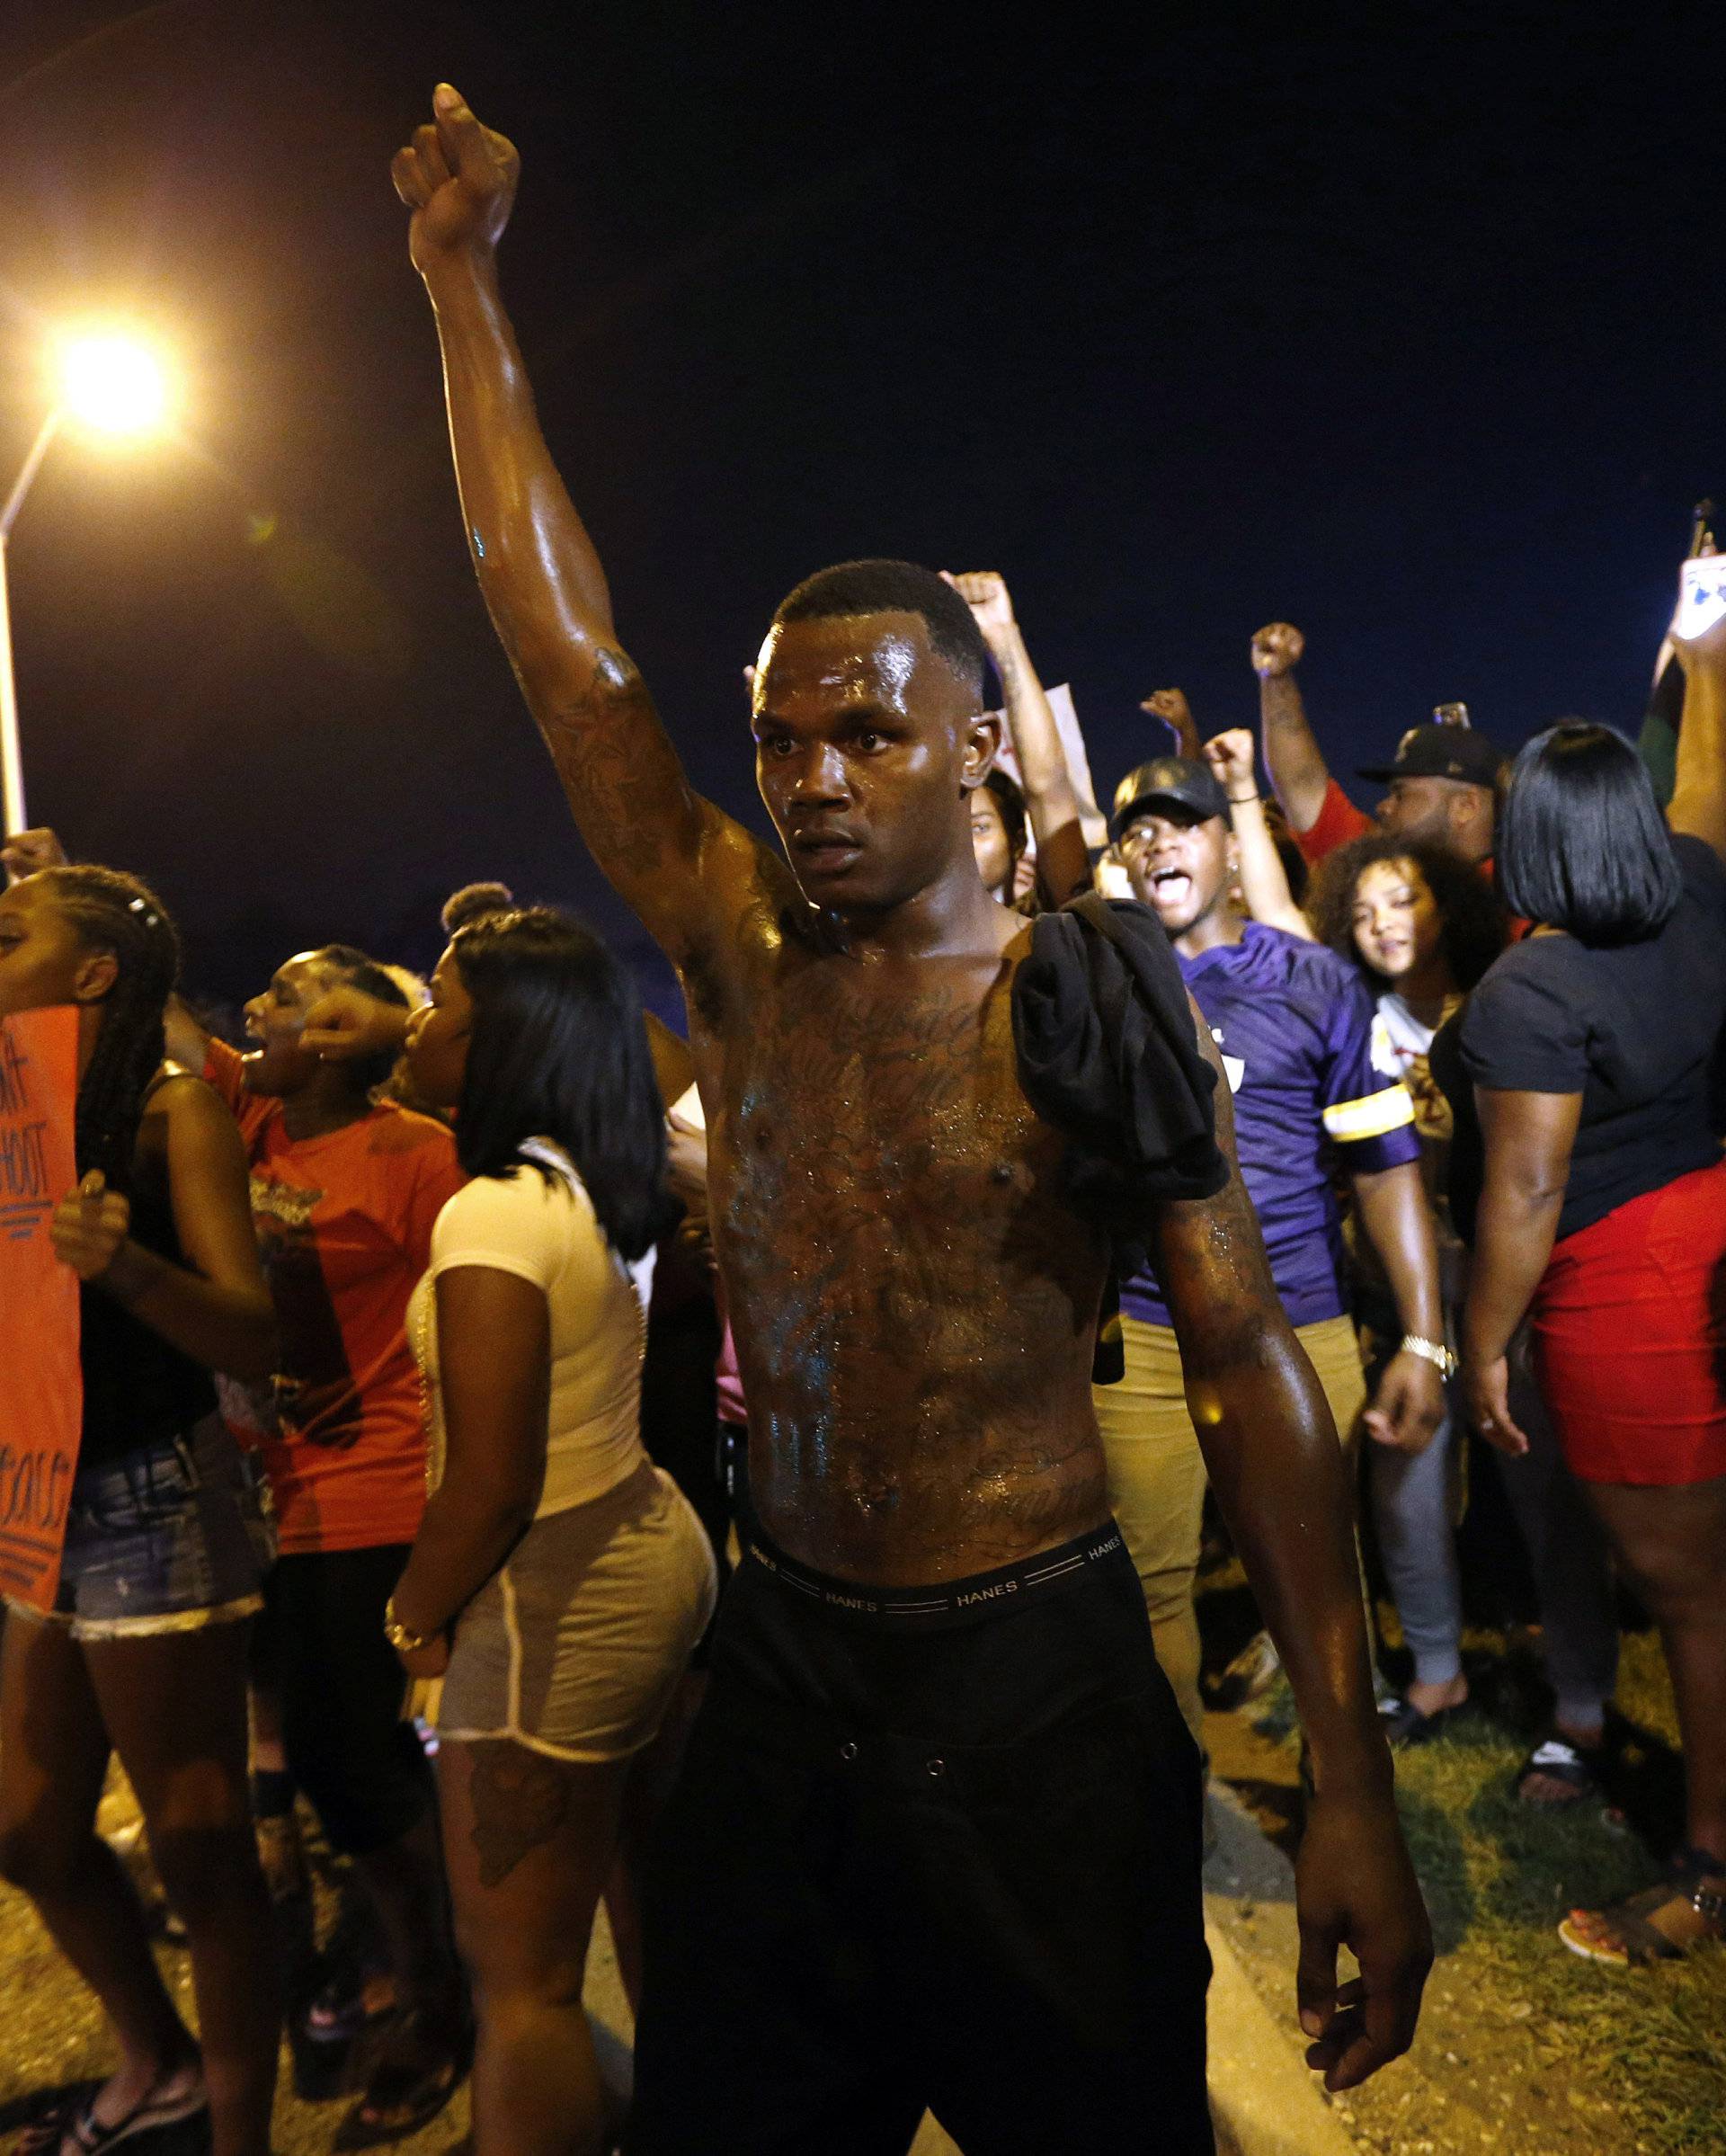 Demonstrators protest the shooting death of Alton Sterling near the headquarters of the Baton Rouge Police Department in Baton Rouge, Louisiana